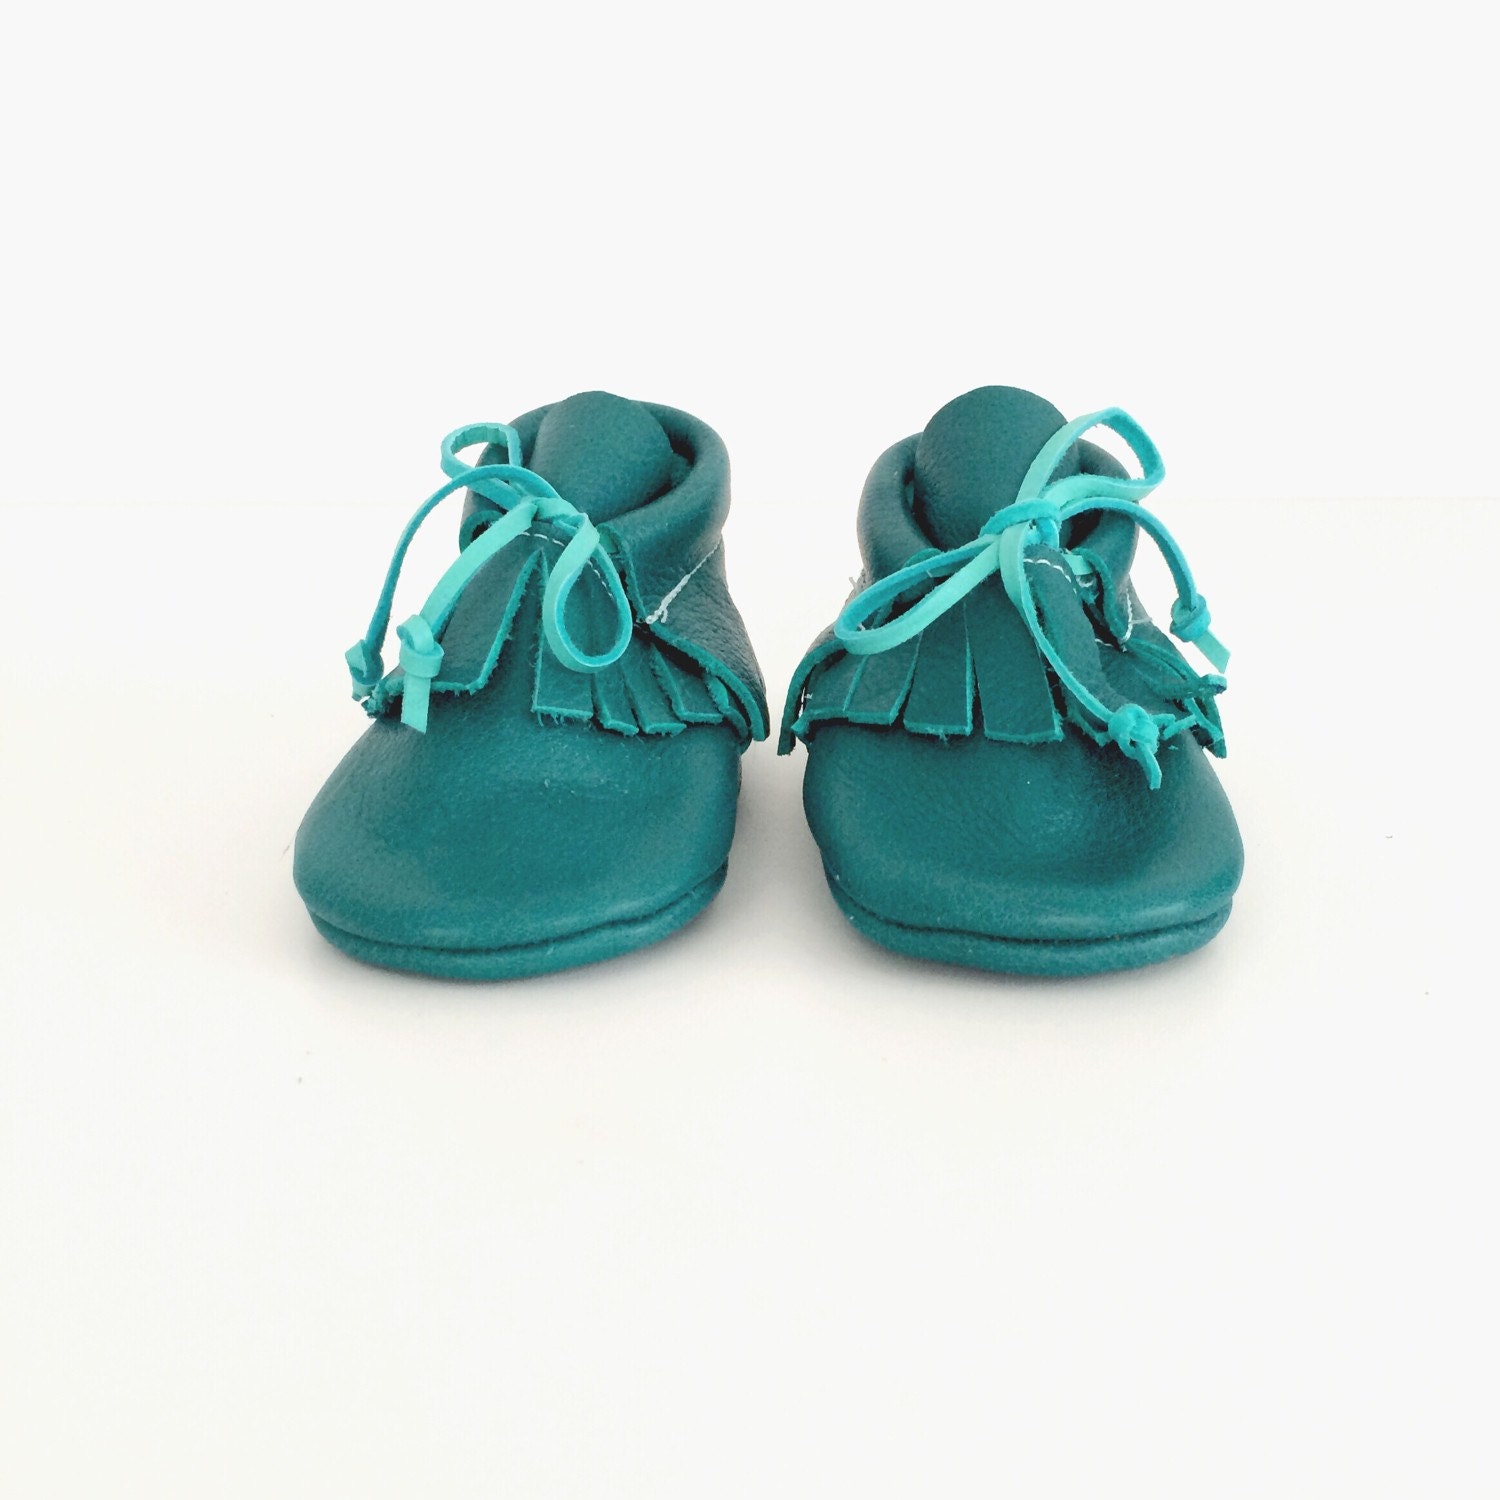 baby moccasins booties / green-teal leather